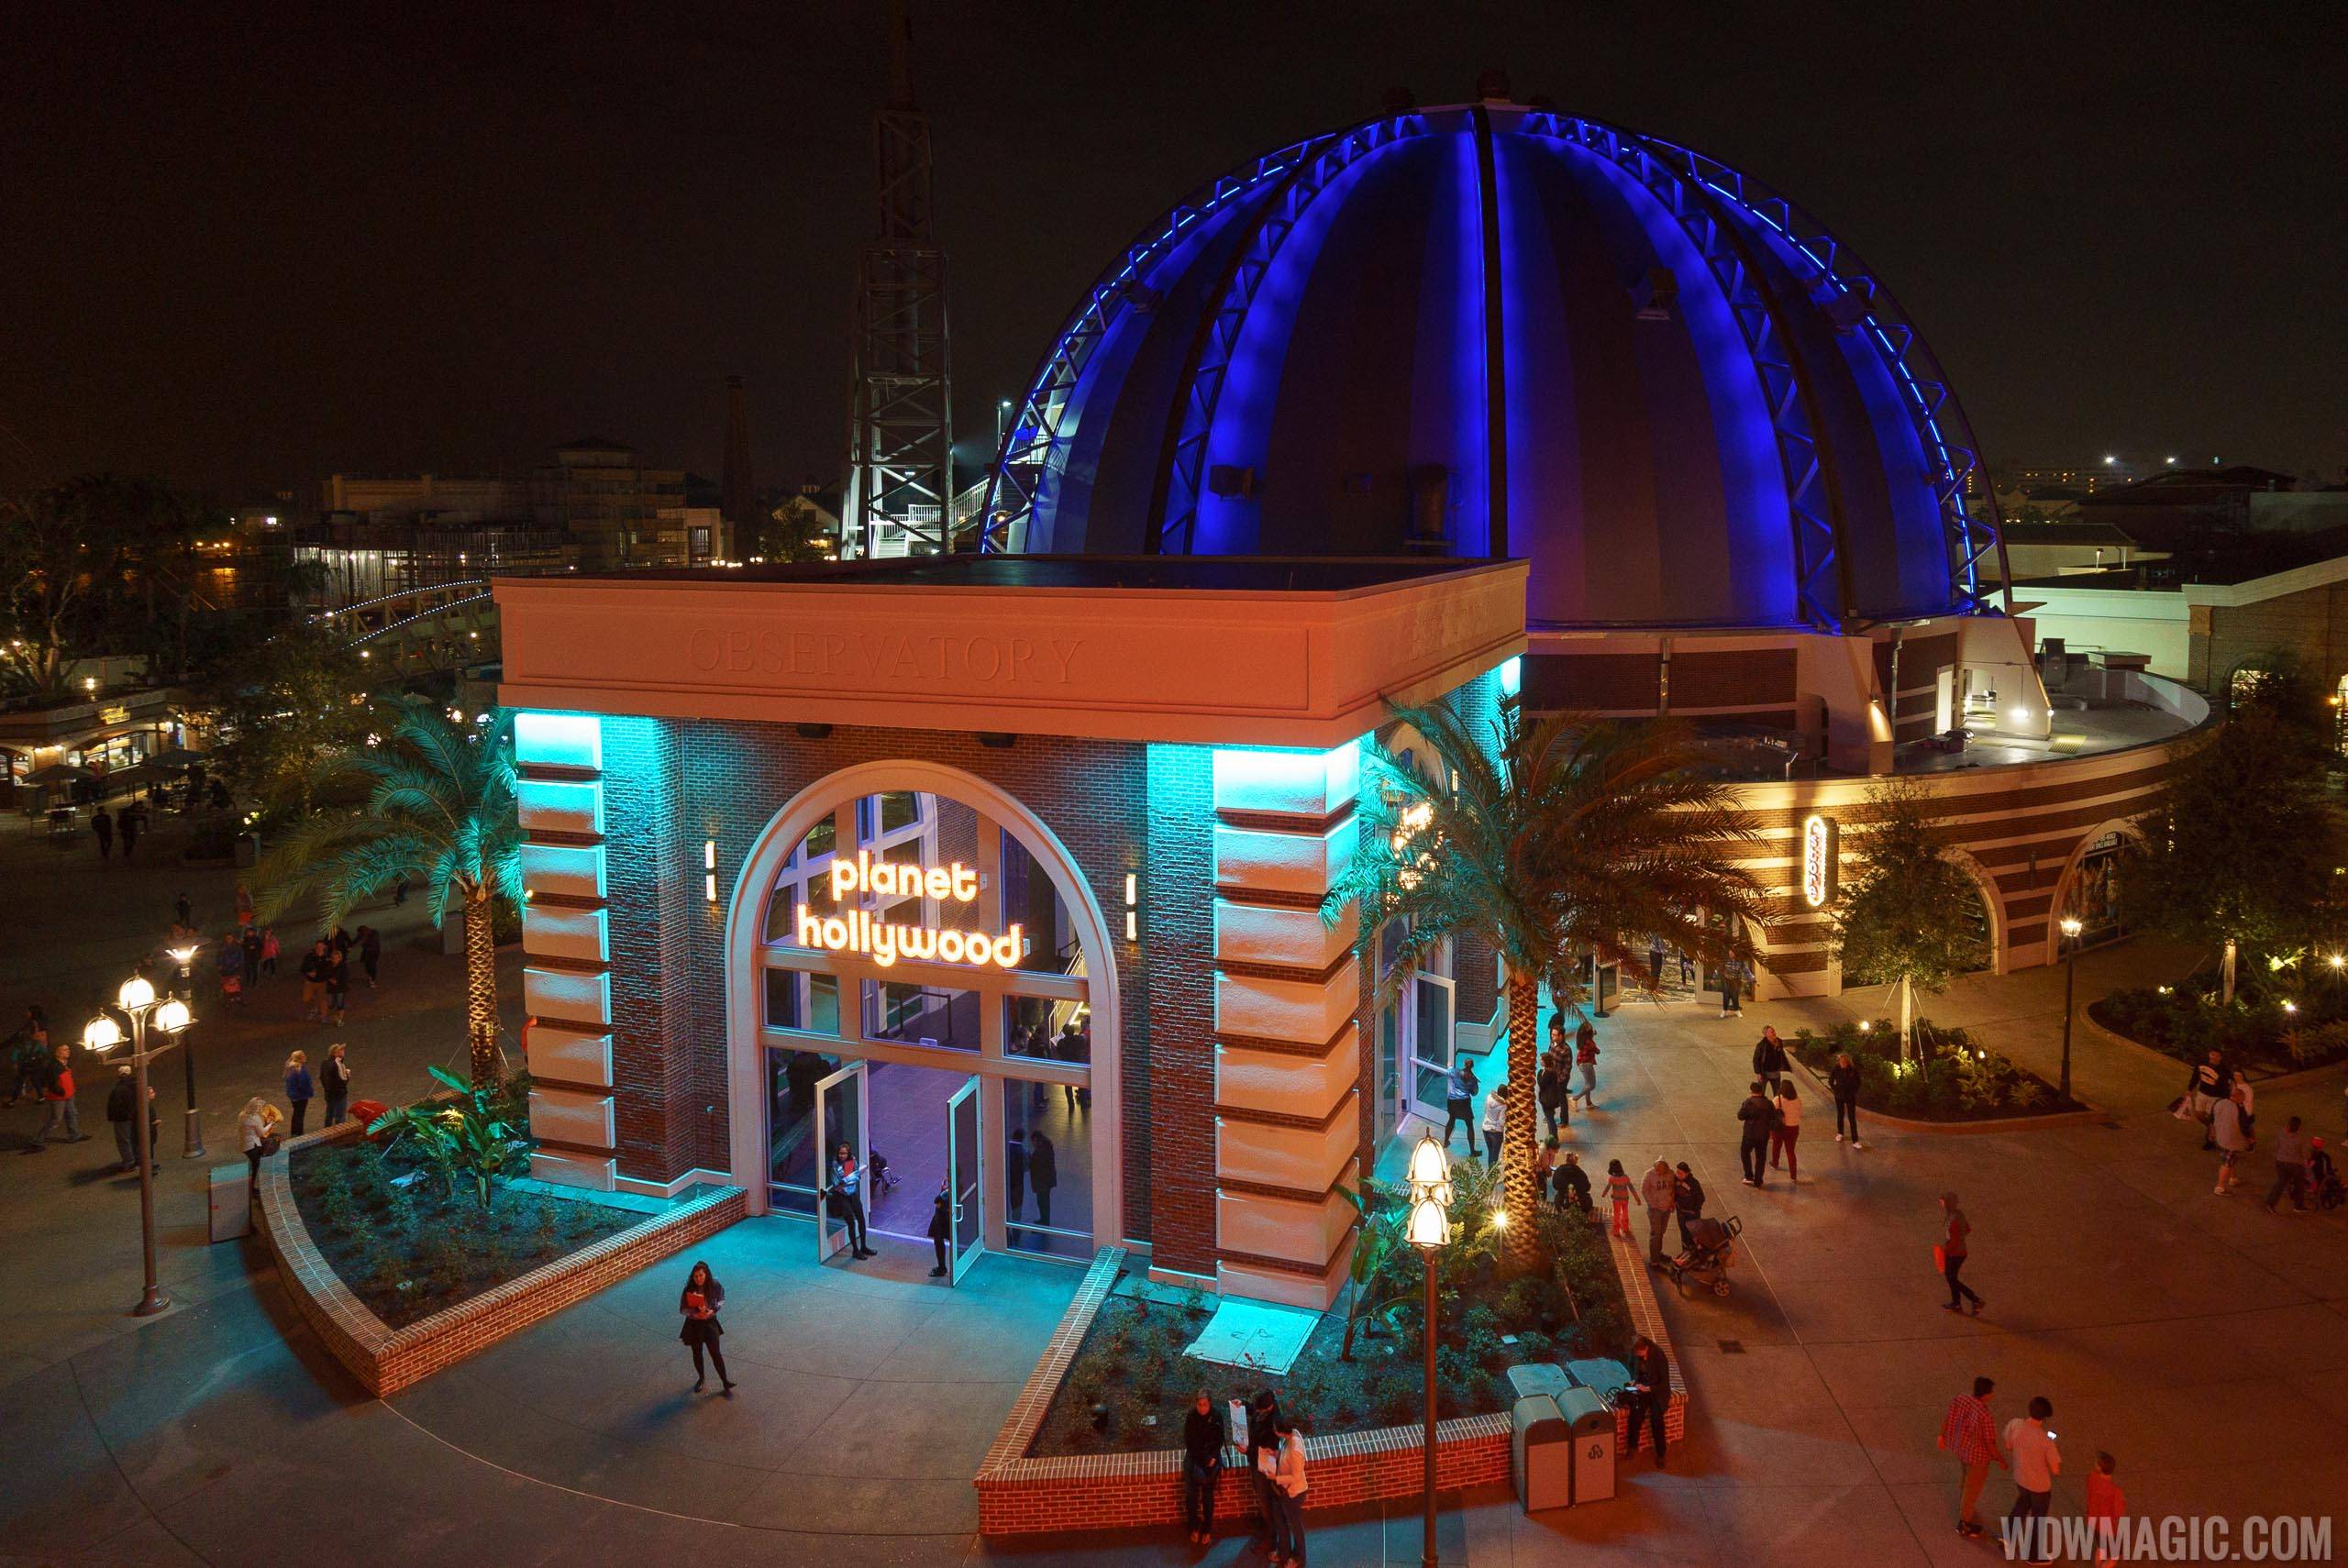 Planet Hollywood Observatory - Exterior at night